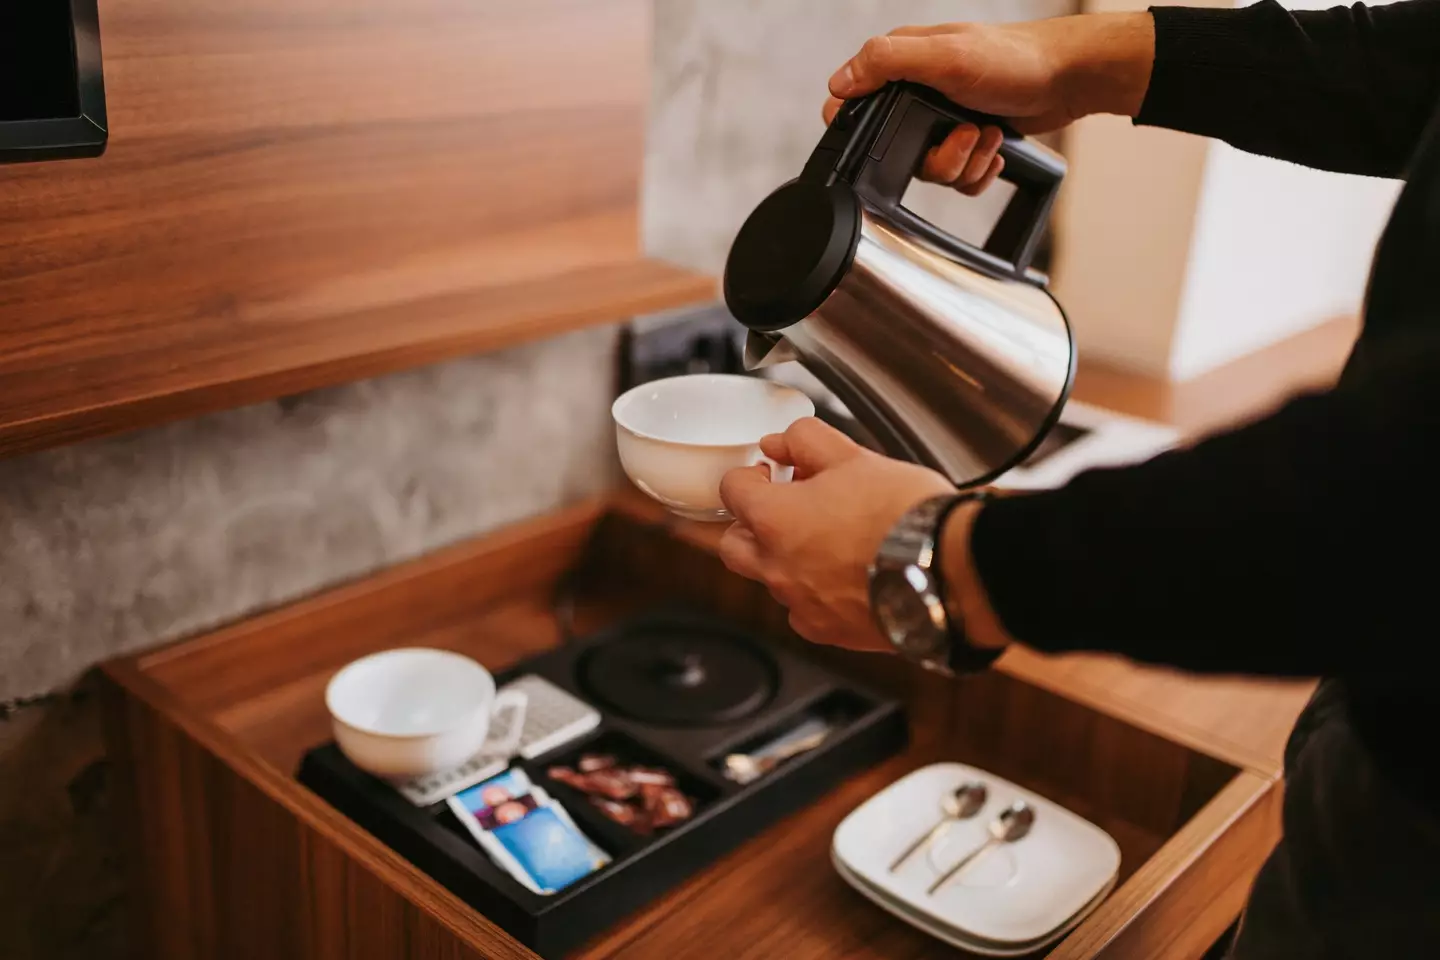 Avoiding using the kettle would be wise when staying in a hotel room.